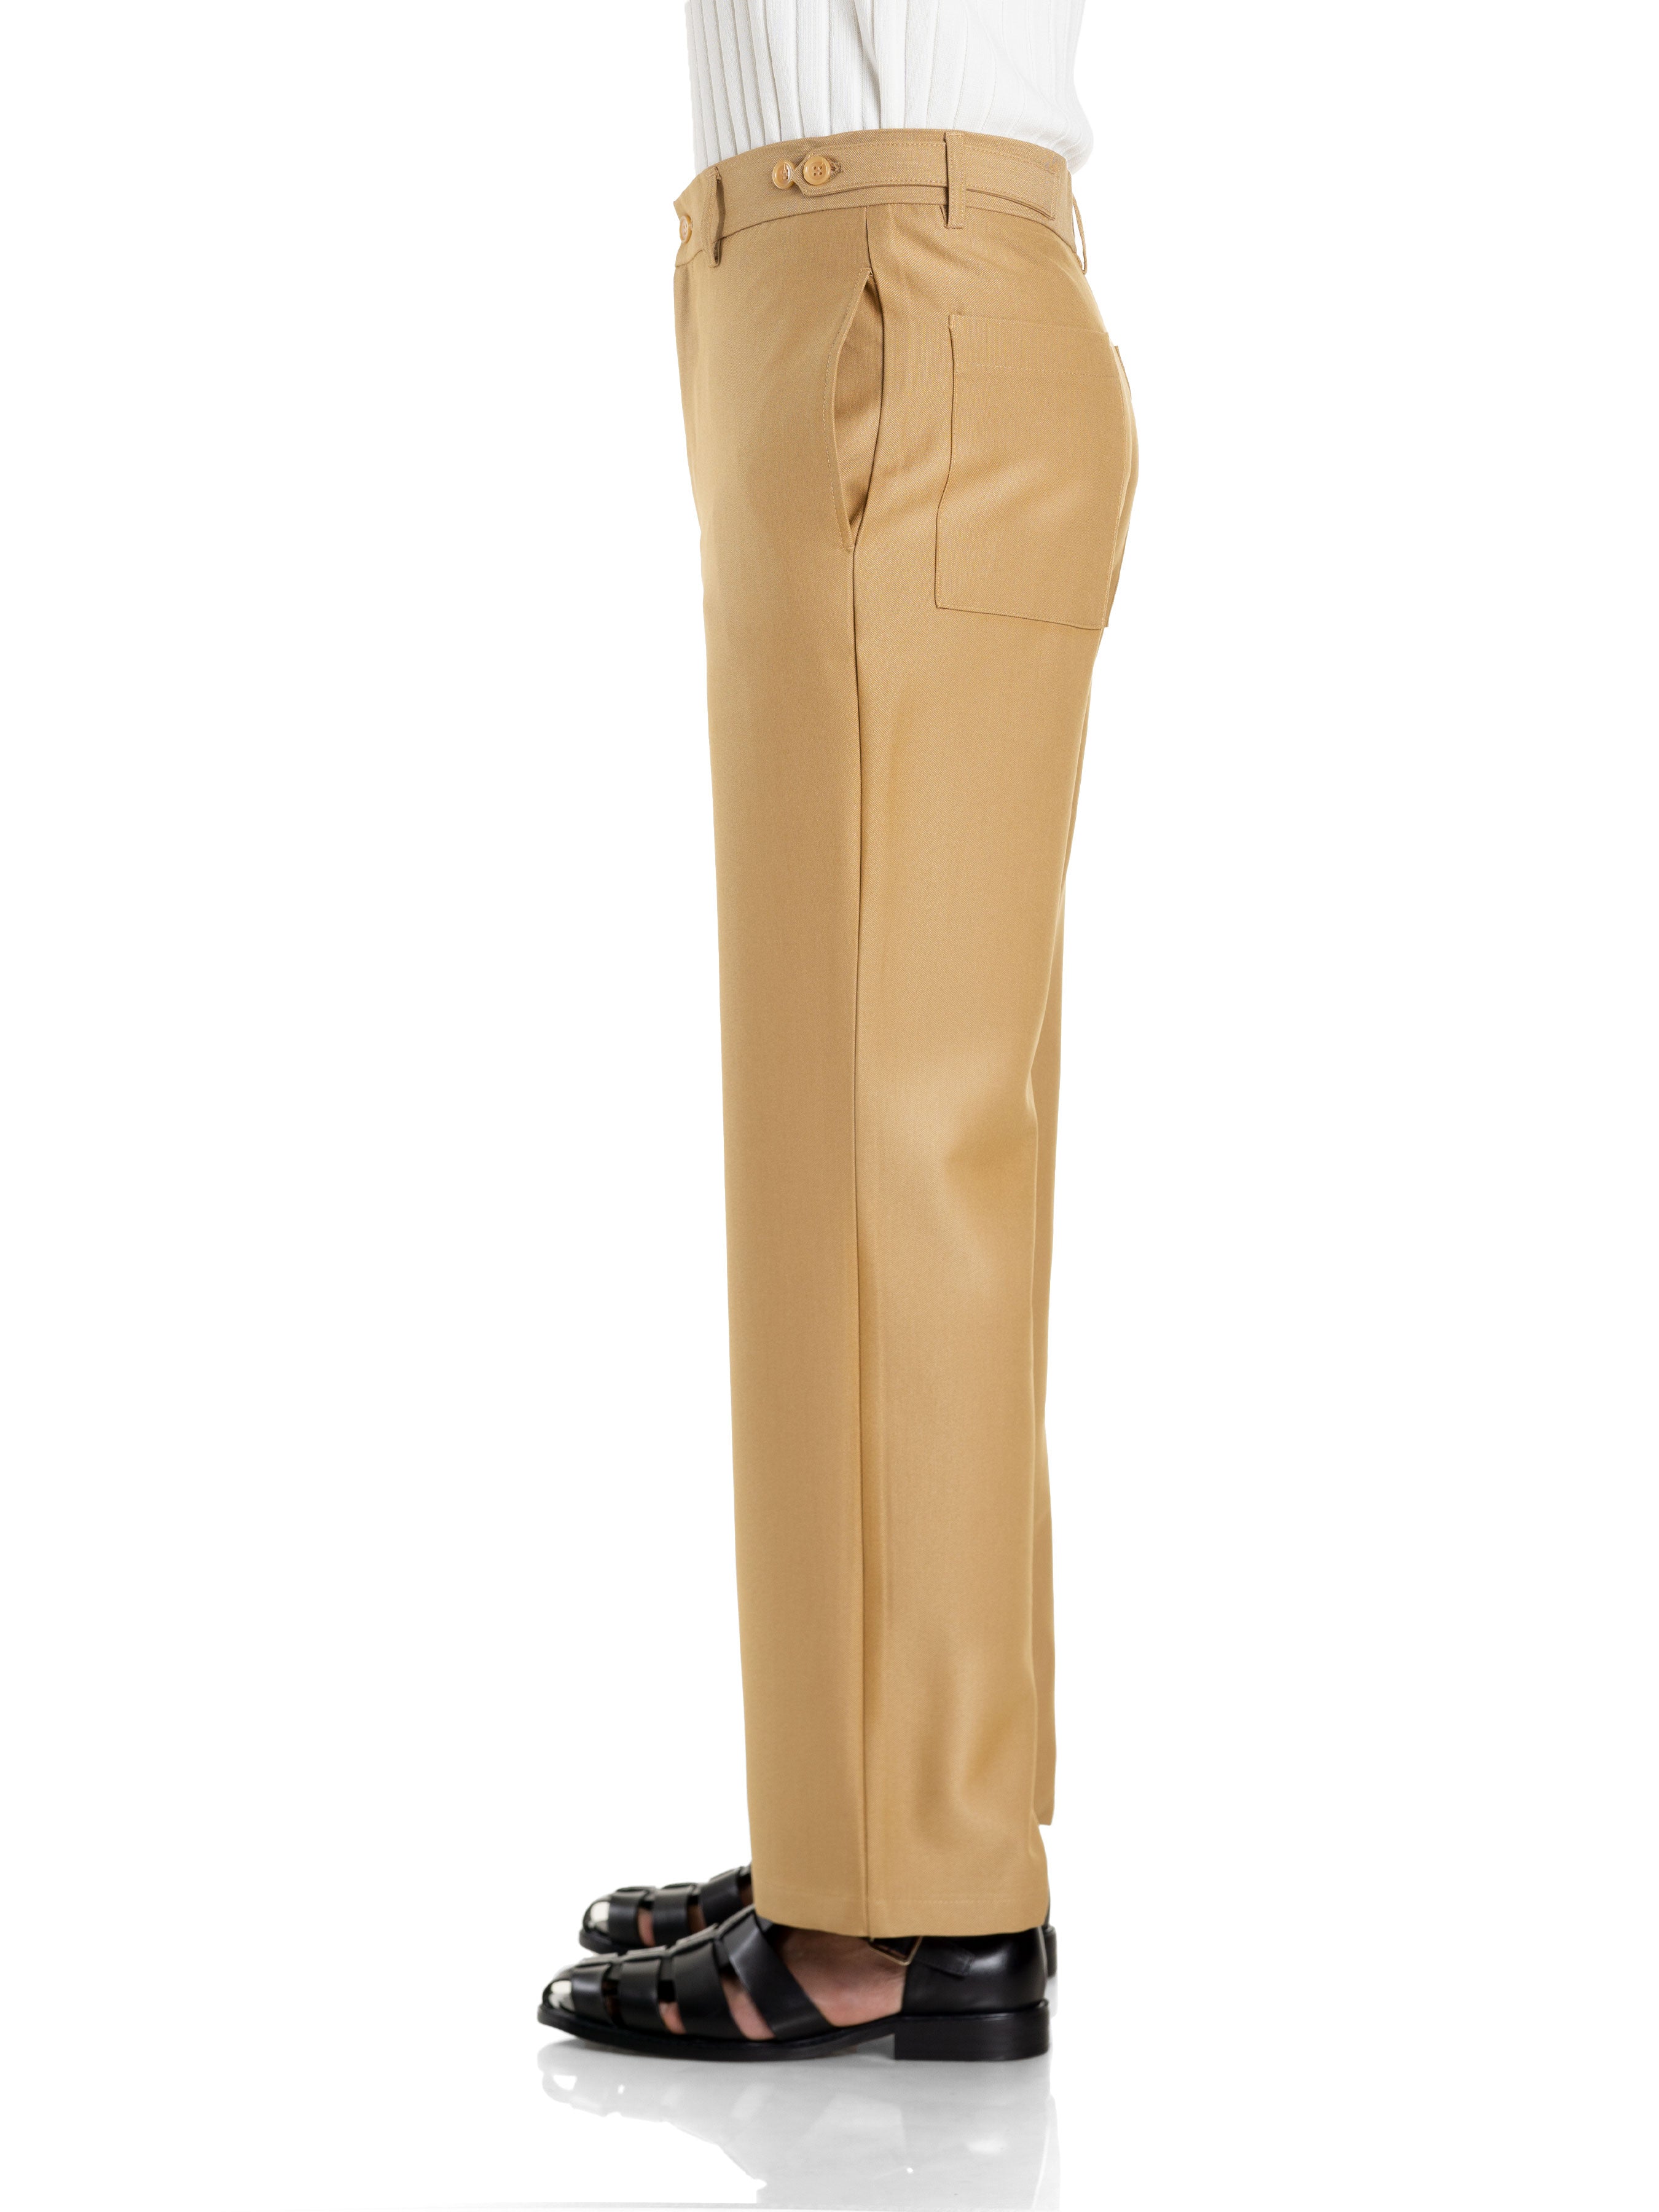 Trousers Belt Loop With Side Adjusters - Wheat (Straight Cut) - Zeve Shoes